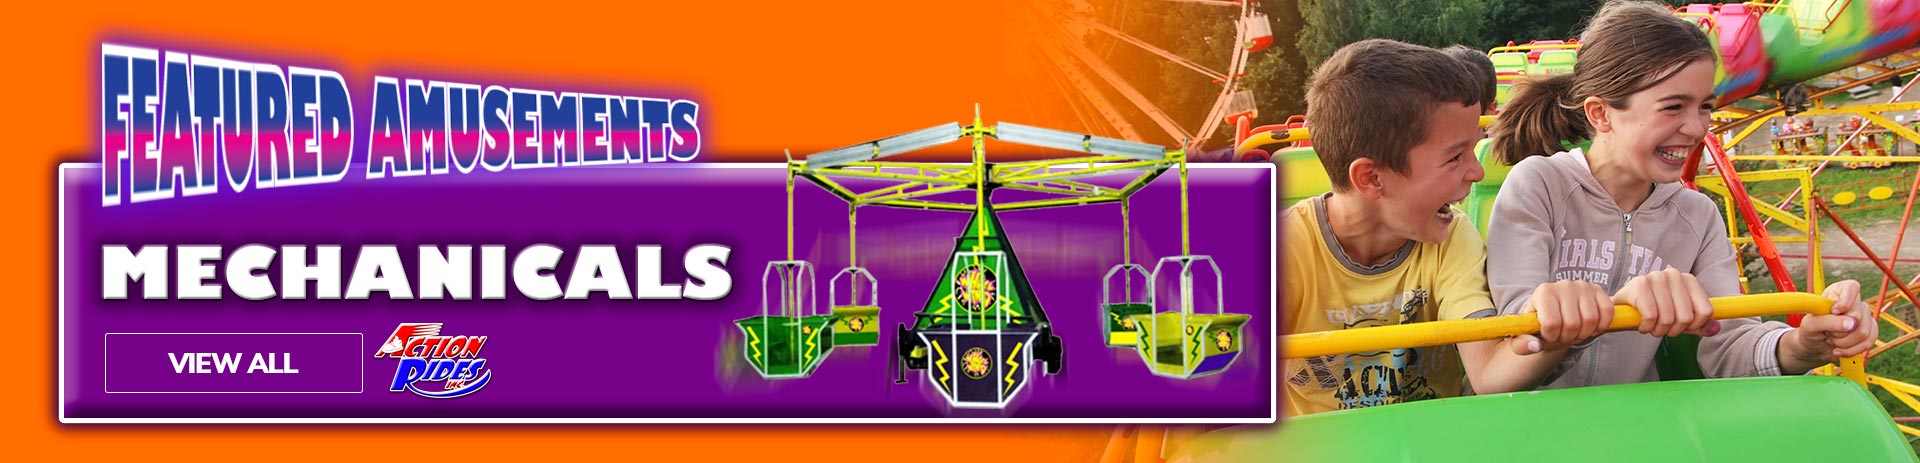 Portable Rides, Mechanical, Inflatable, Water Shooting Carnival Games